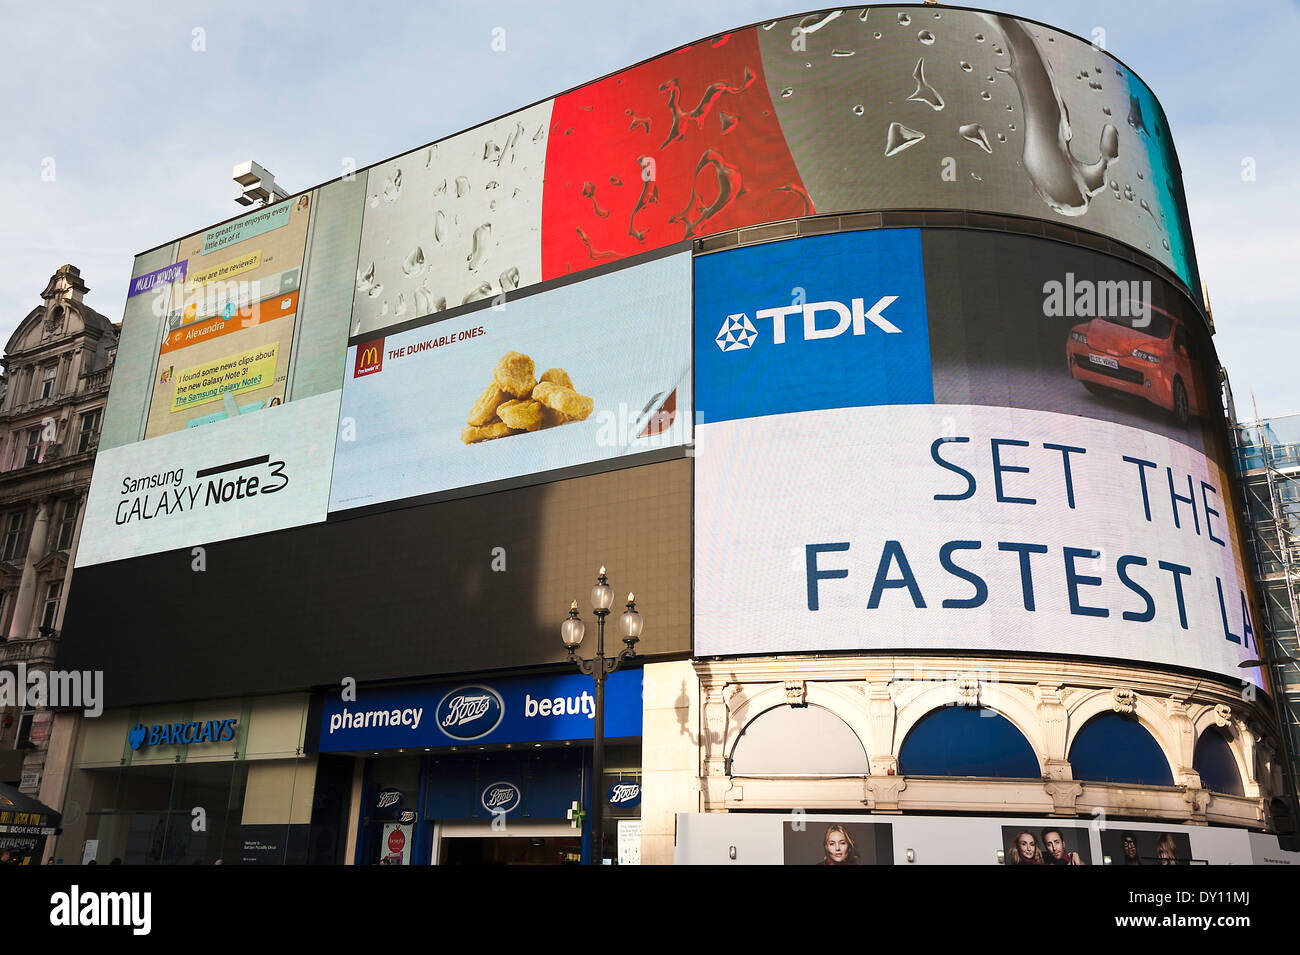 Illuminated Advertising Hoardings and Screens on a Building on the Corner of Piccadilly Circus and Shaftesbury Avenue London Stock Photo